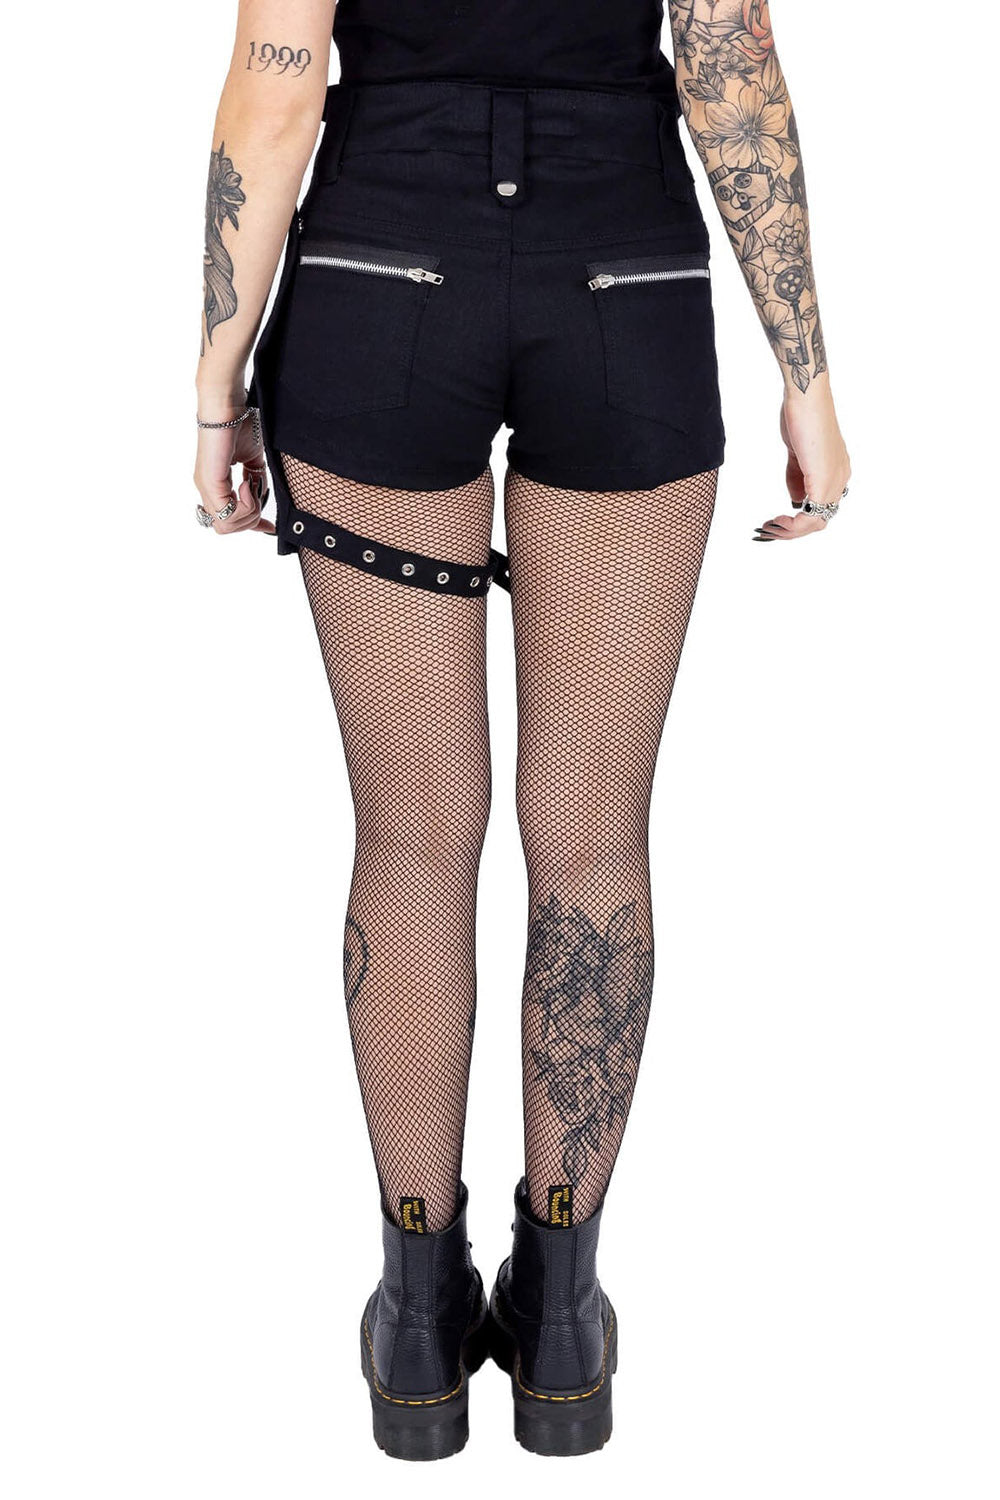 womens gothic shorts with utility bag